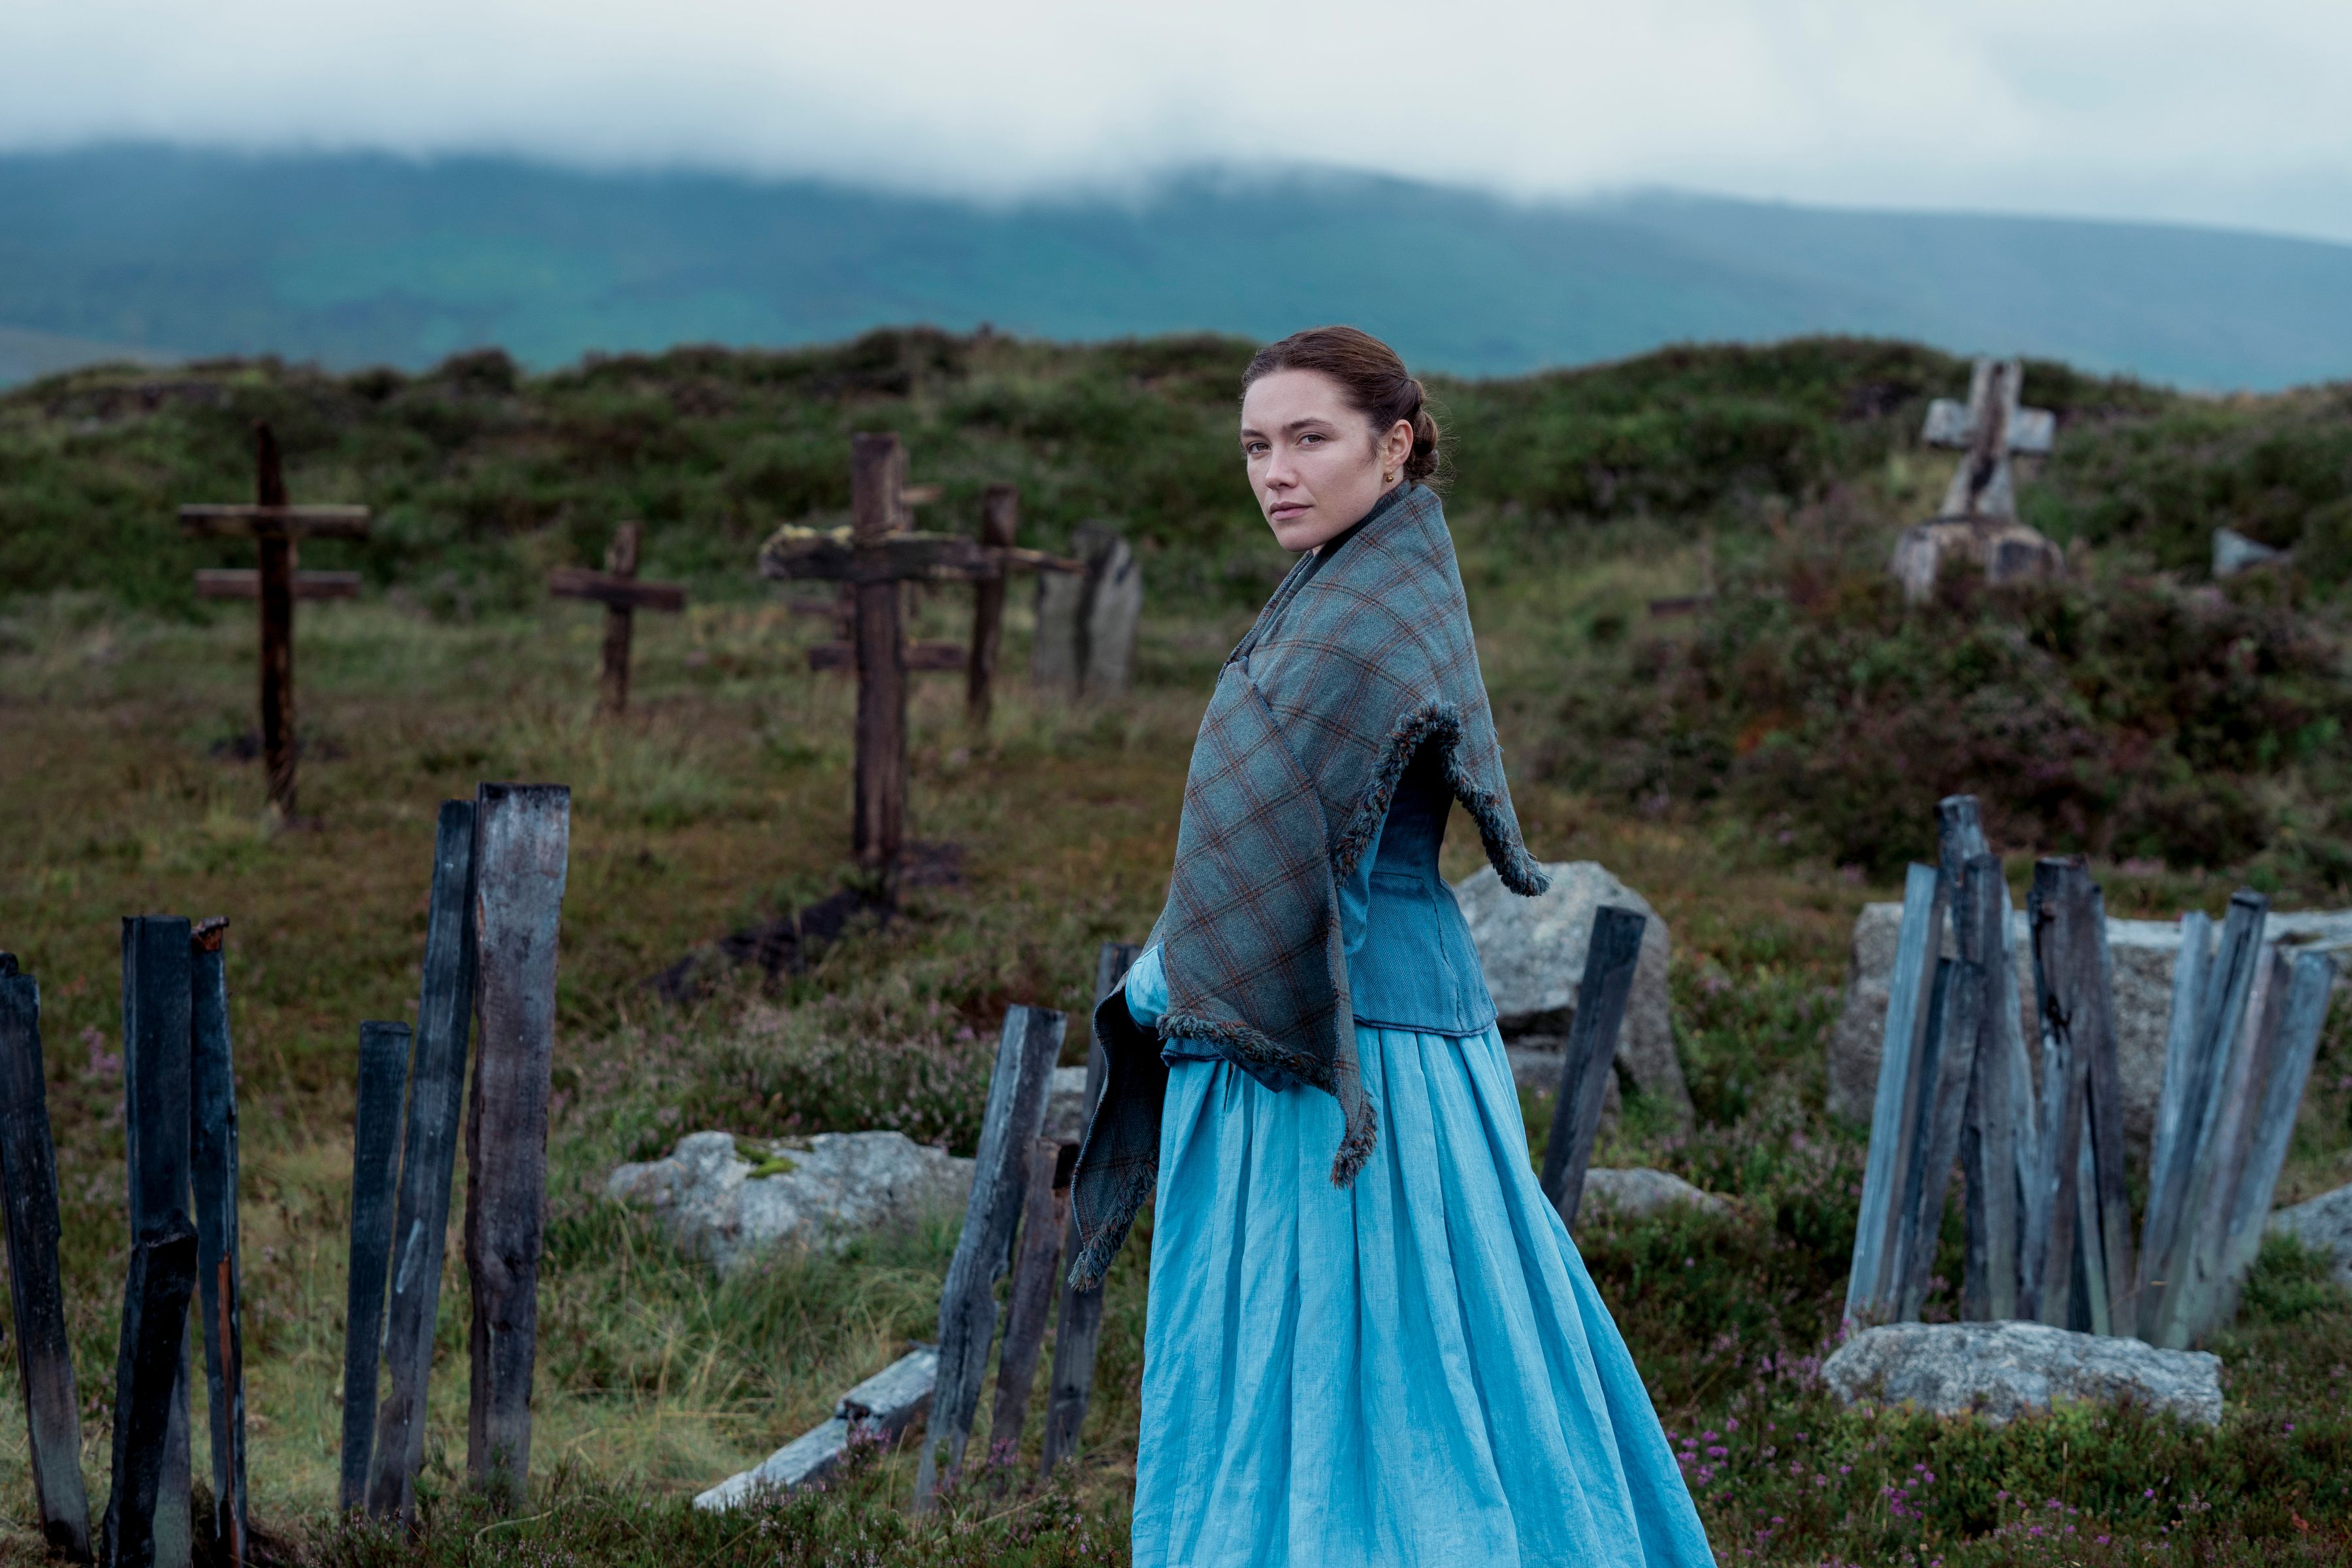 The Wonder review: Florence Pugh shines in gothic mystery